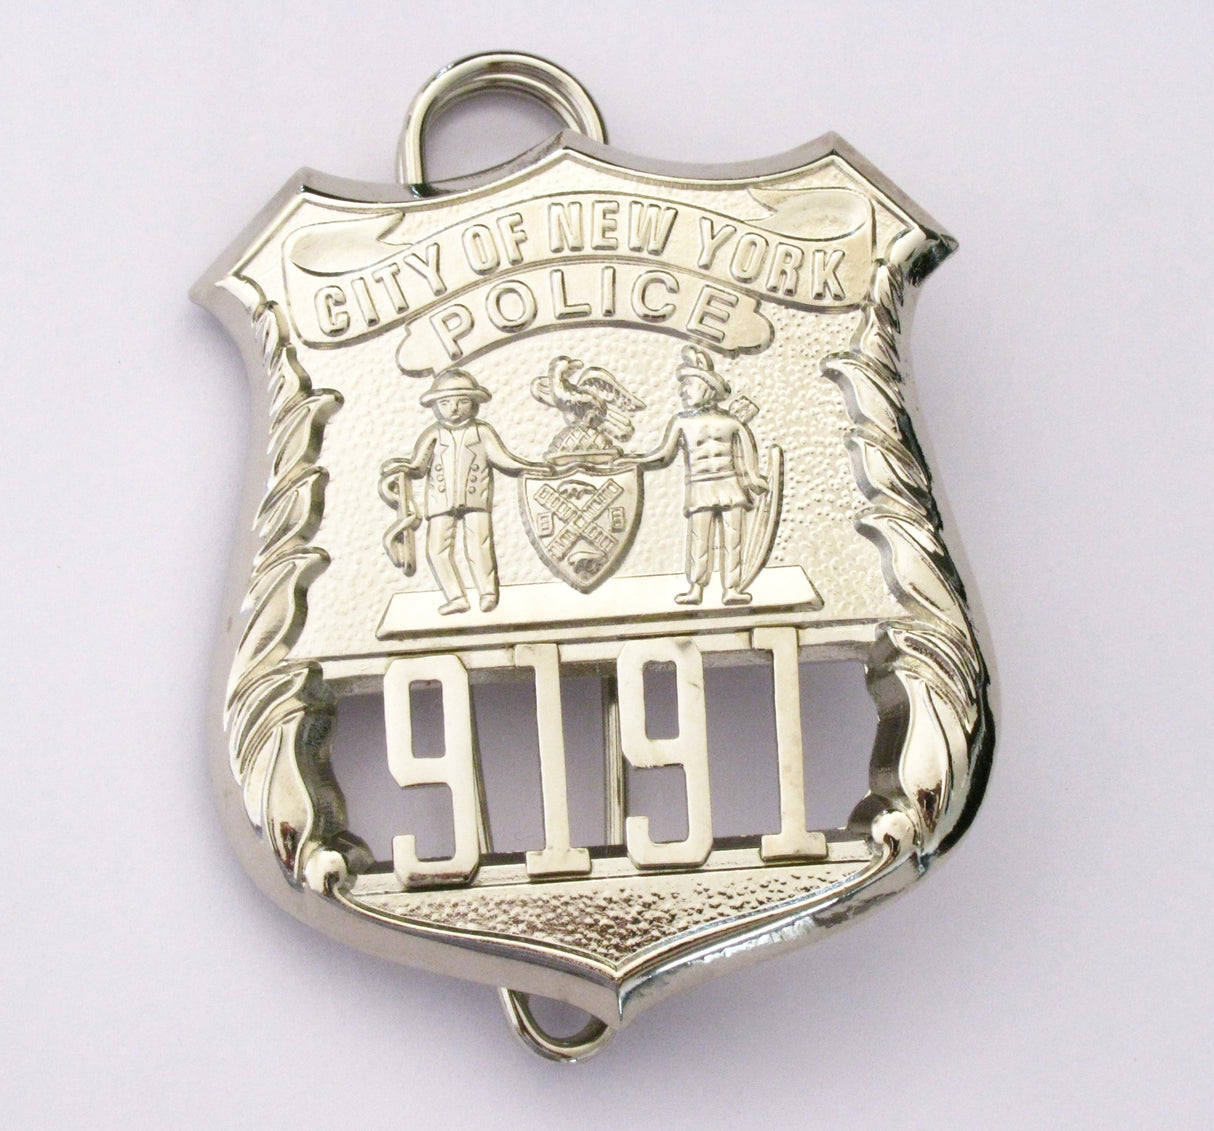 NYPD Badge 9191 1